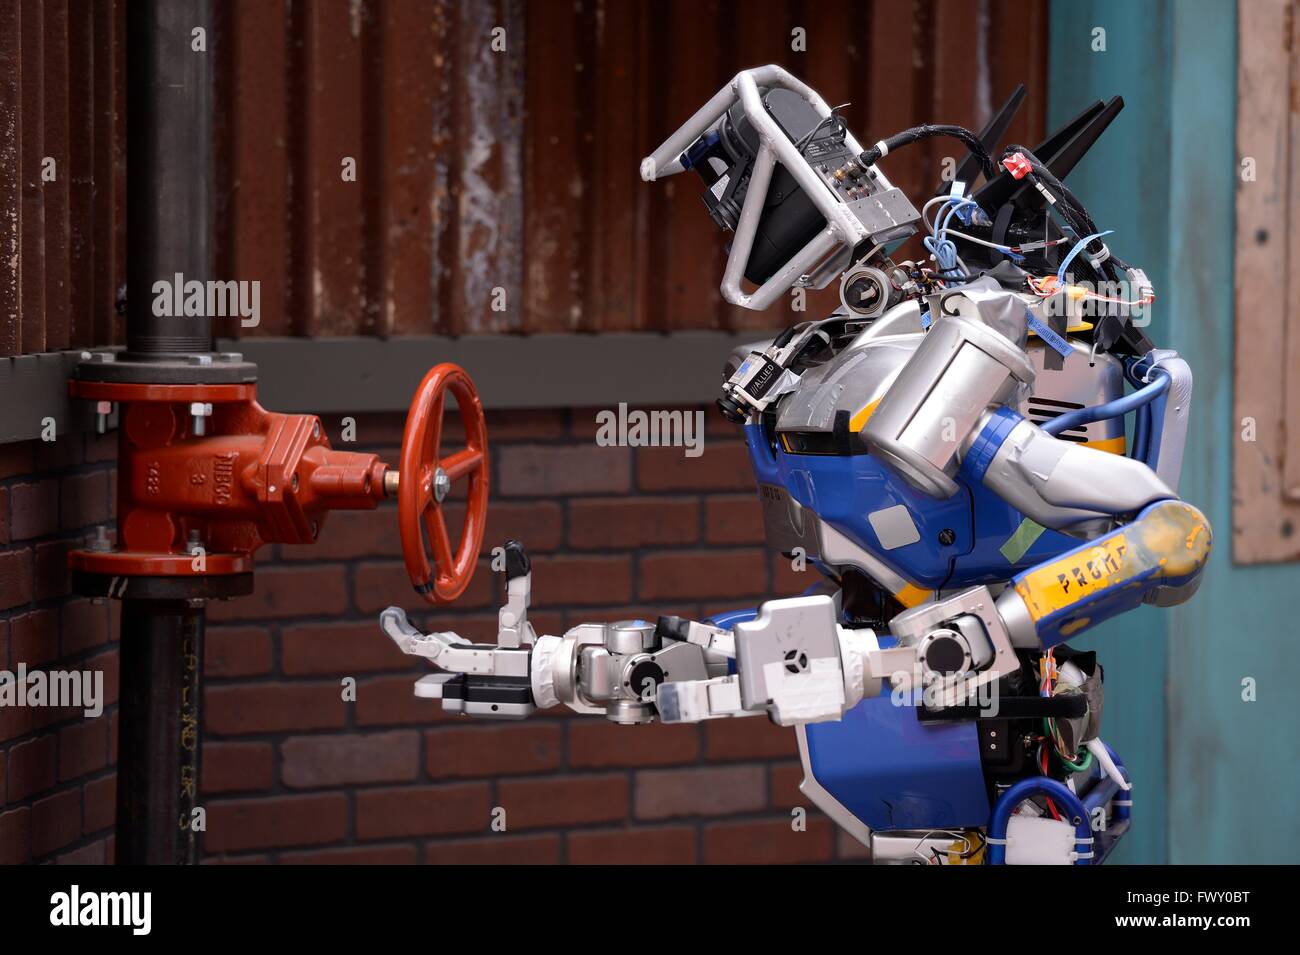 Team HRP2 Tokyo robot during the DARPA Rescue Robot Showdown at  Fairplex Fairground June 6, 2015 in Pomona, California. The DARPA event is to challenge teams to design robots that will conduct humanitarian, disaster relief and related operations. Stock Photo